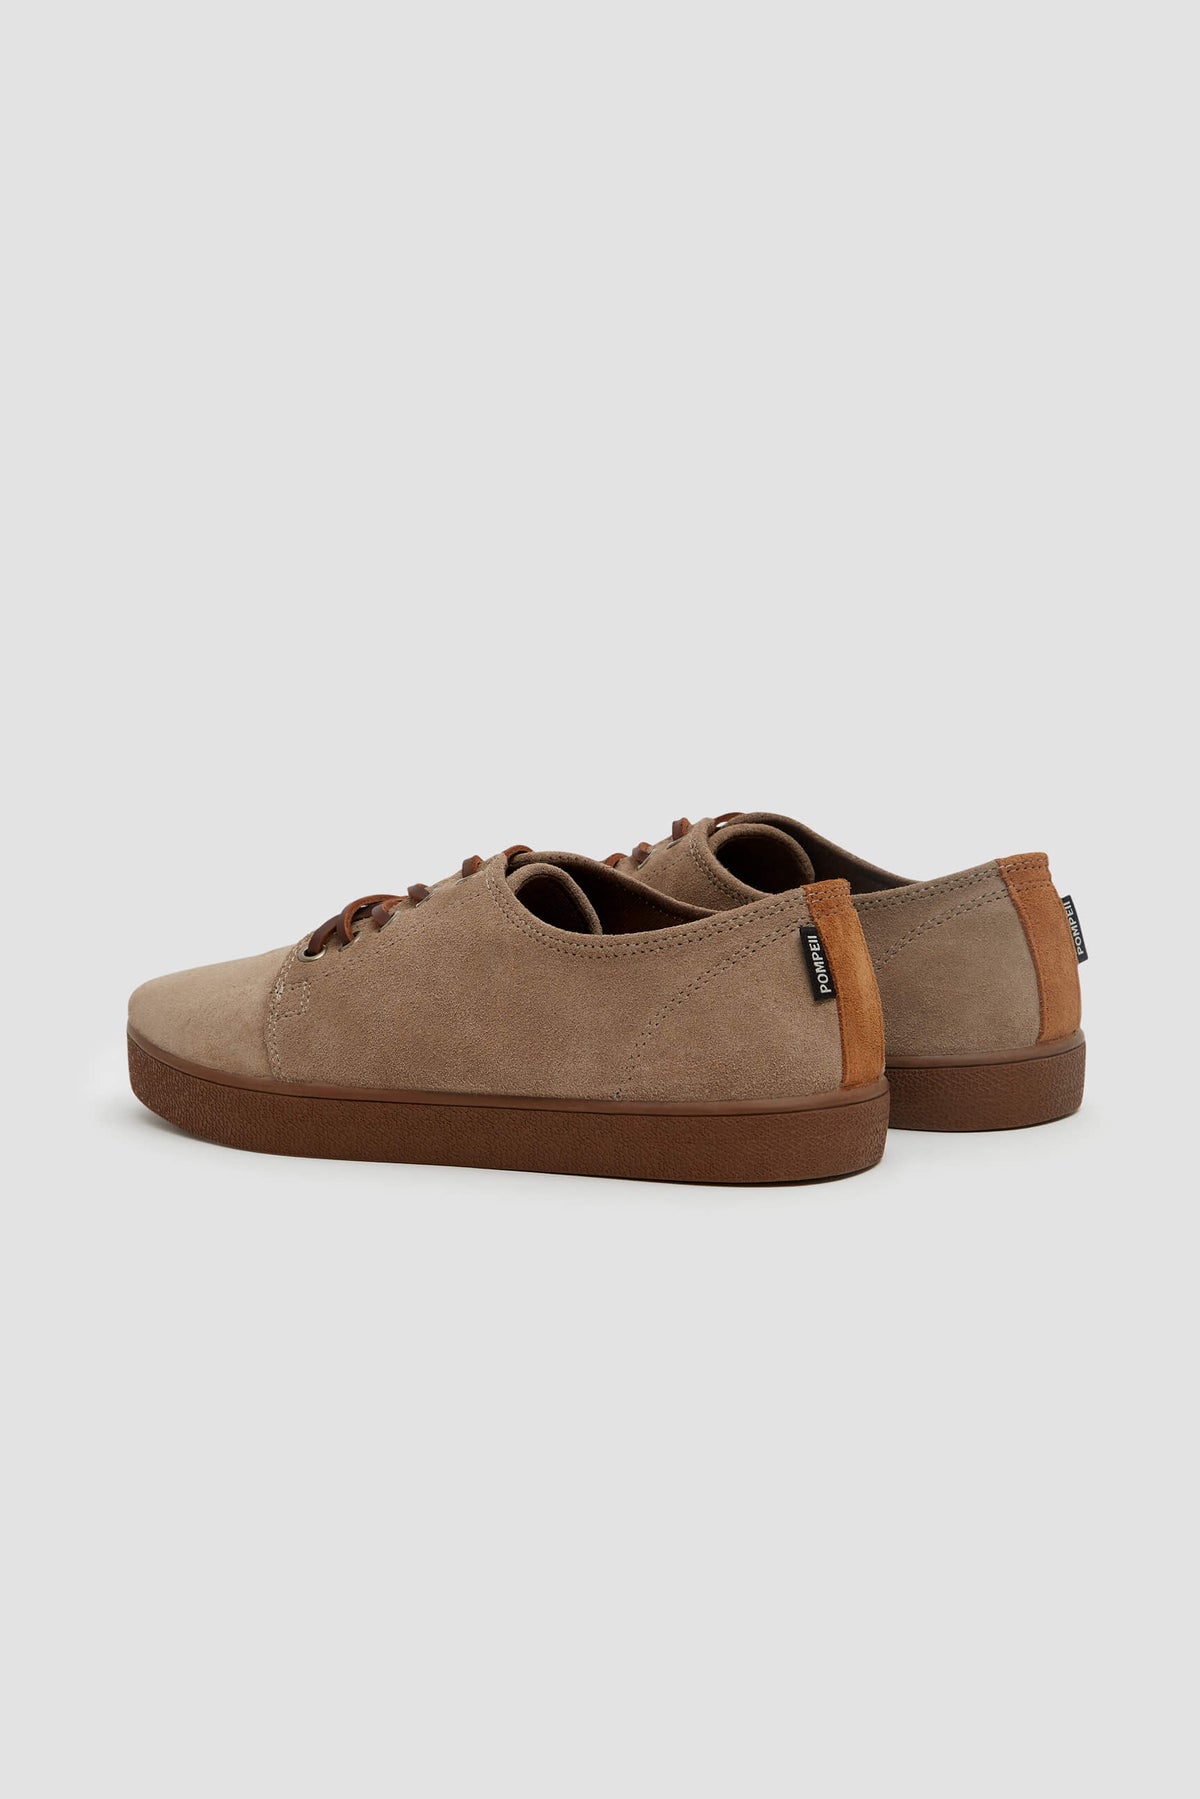 HIGBY SUEDE HYDRO TAUPE ROAST